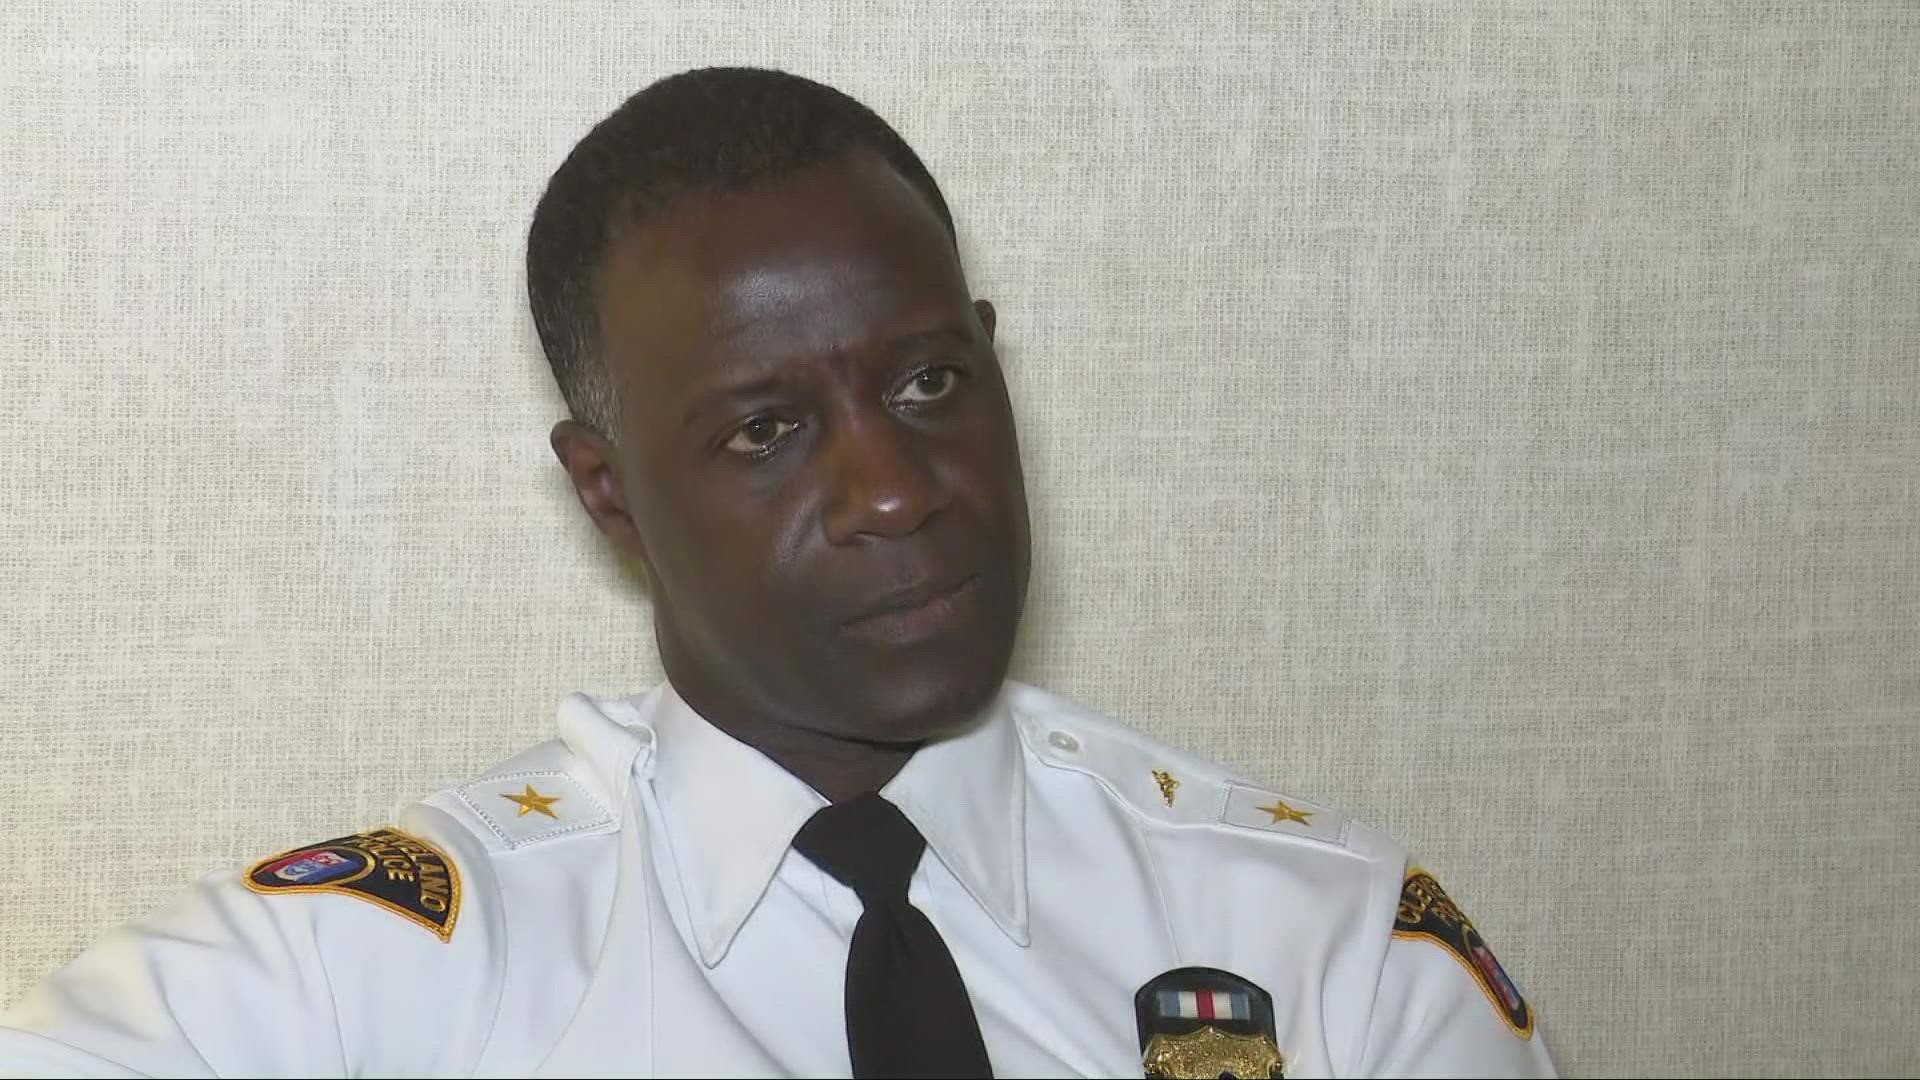 Cleveland Police Chief Calvin Williams abruptly announced his resignation on Thursday afternoon.